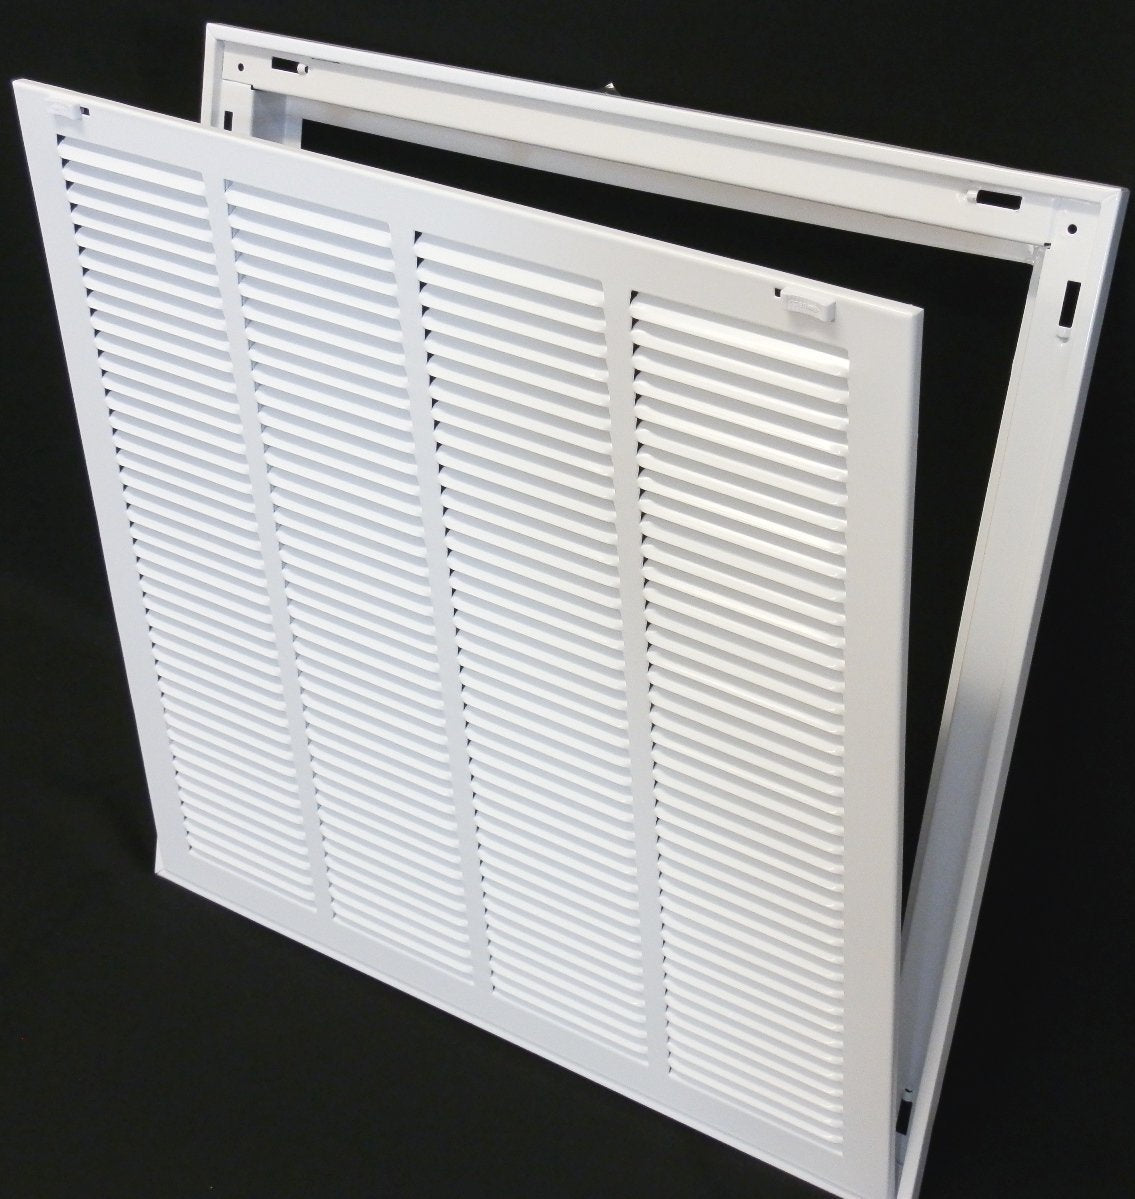 14&quot; X 12&quot; Steel Return Air Filter Grille for 1&quot; Filter - Removable Frame - [Outer Dimensions: 16 5/8&quot; X 14 5/8&quot;]